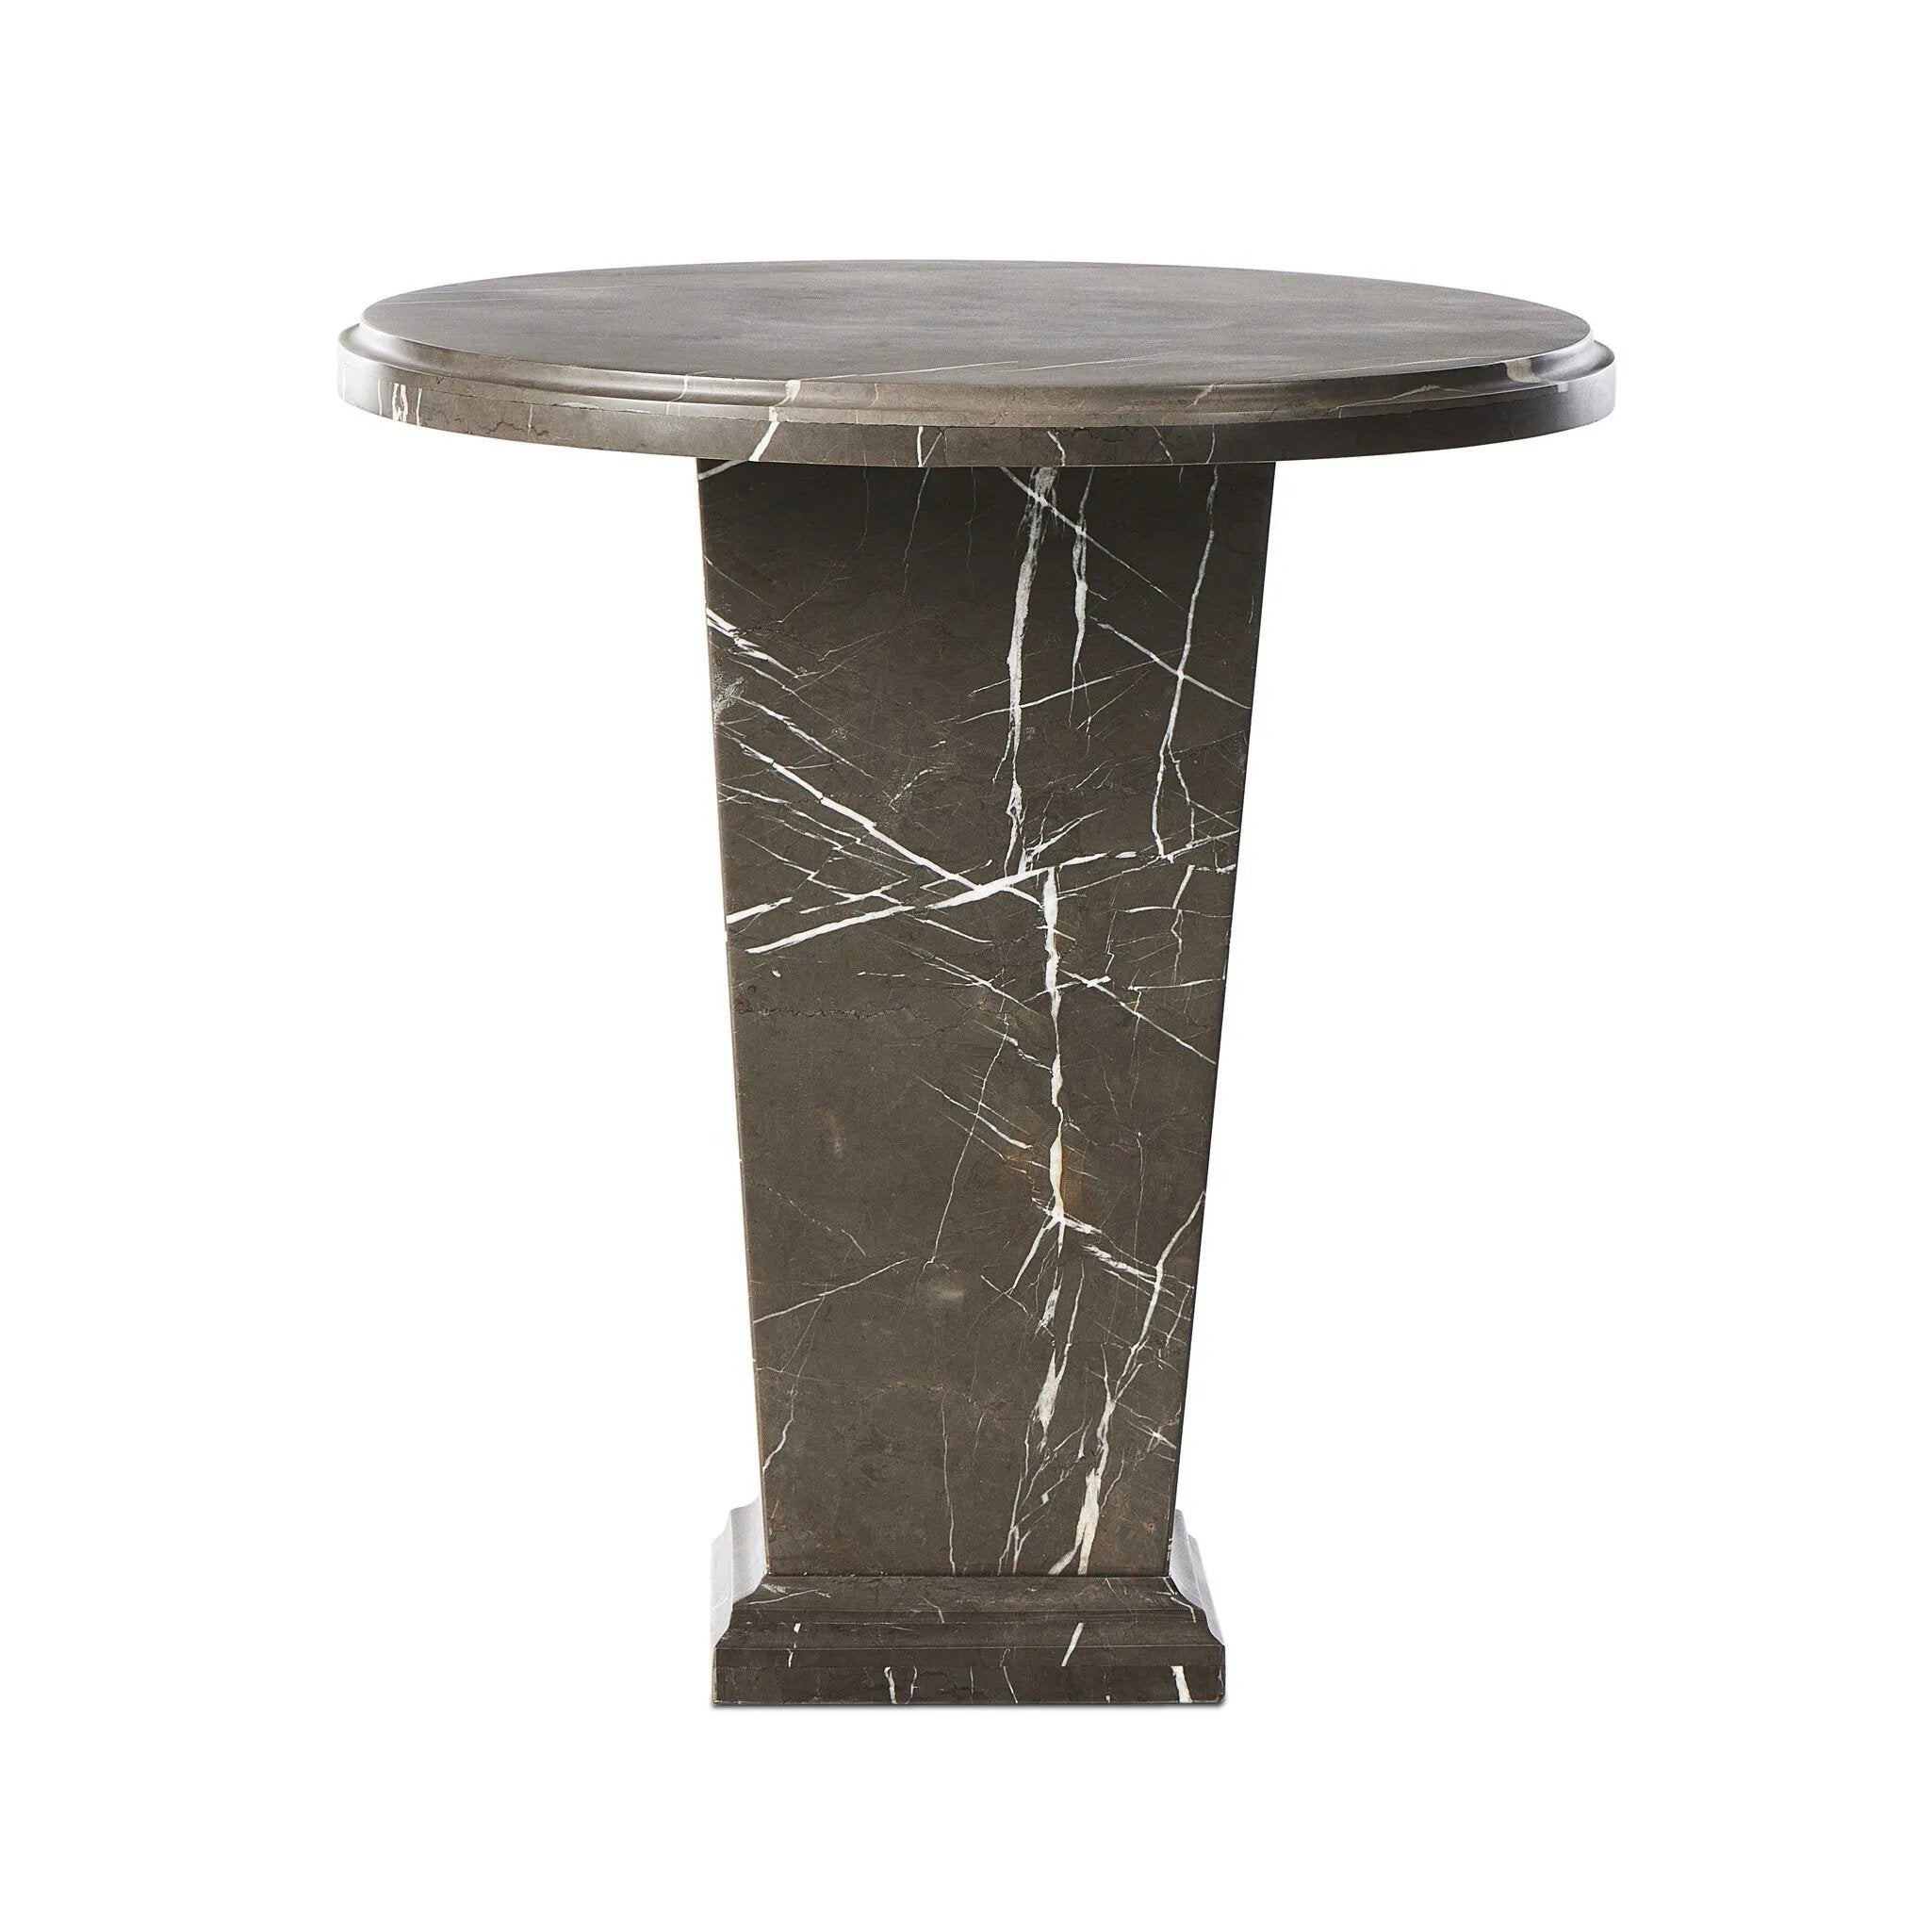 Inspired by Roman columns, a versatile end table of grey Italian marble works a sophisticated touch into any room.Collection: Elemen Amethyst Home provides interior design, new home construction design consulting, vintage area rugs, and lighting in the Nashville metro area.